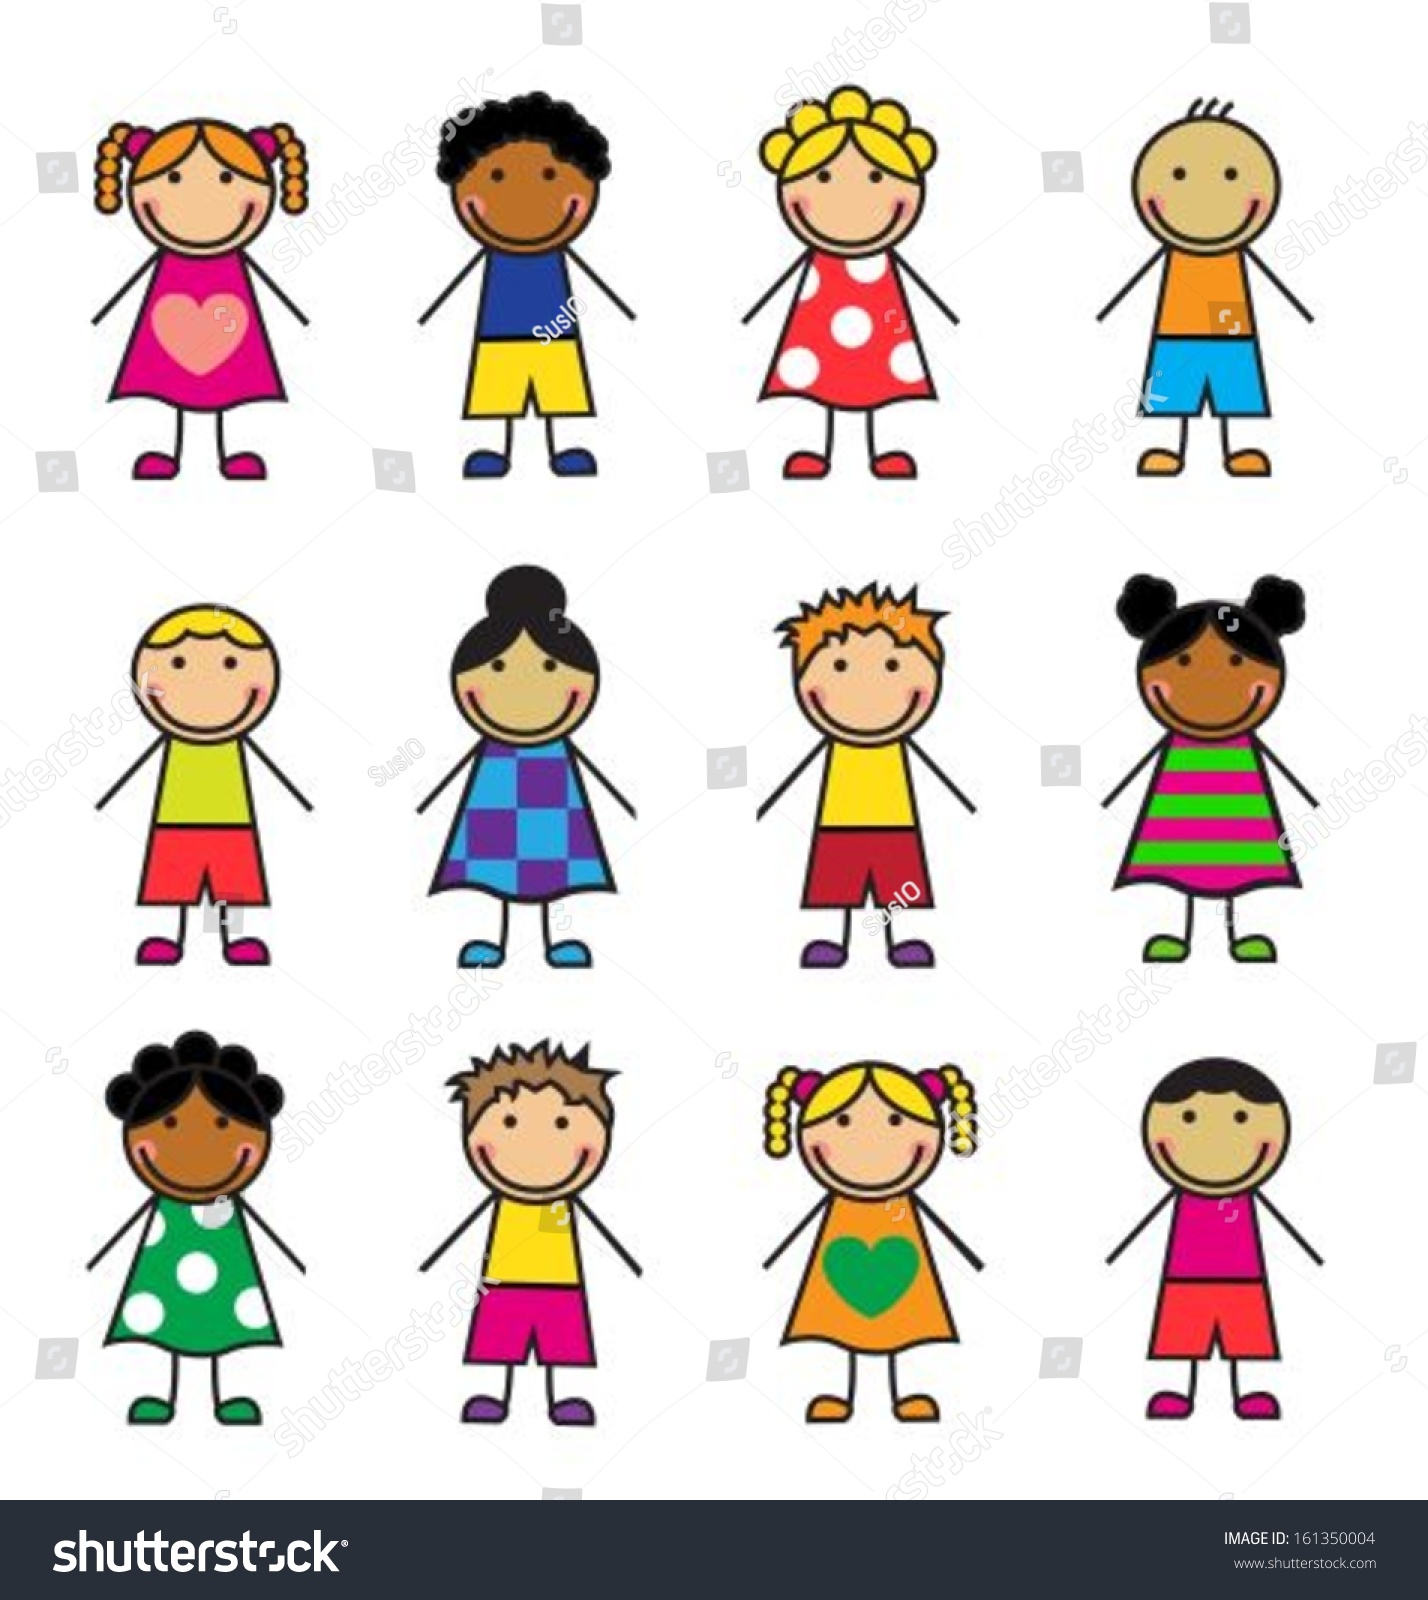 http://image.shutterstock.com/z/stock-vector-cartoon-children-of-different-nationalities-on-a-white-background-161350004.jpg